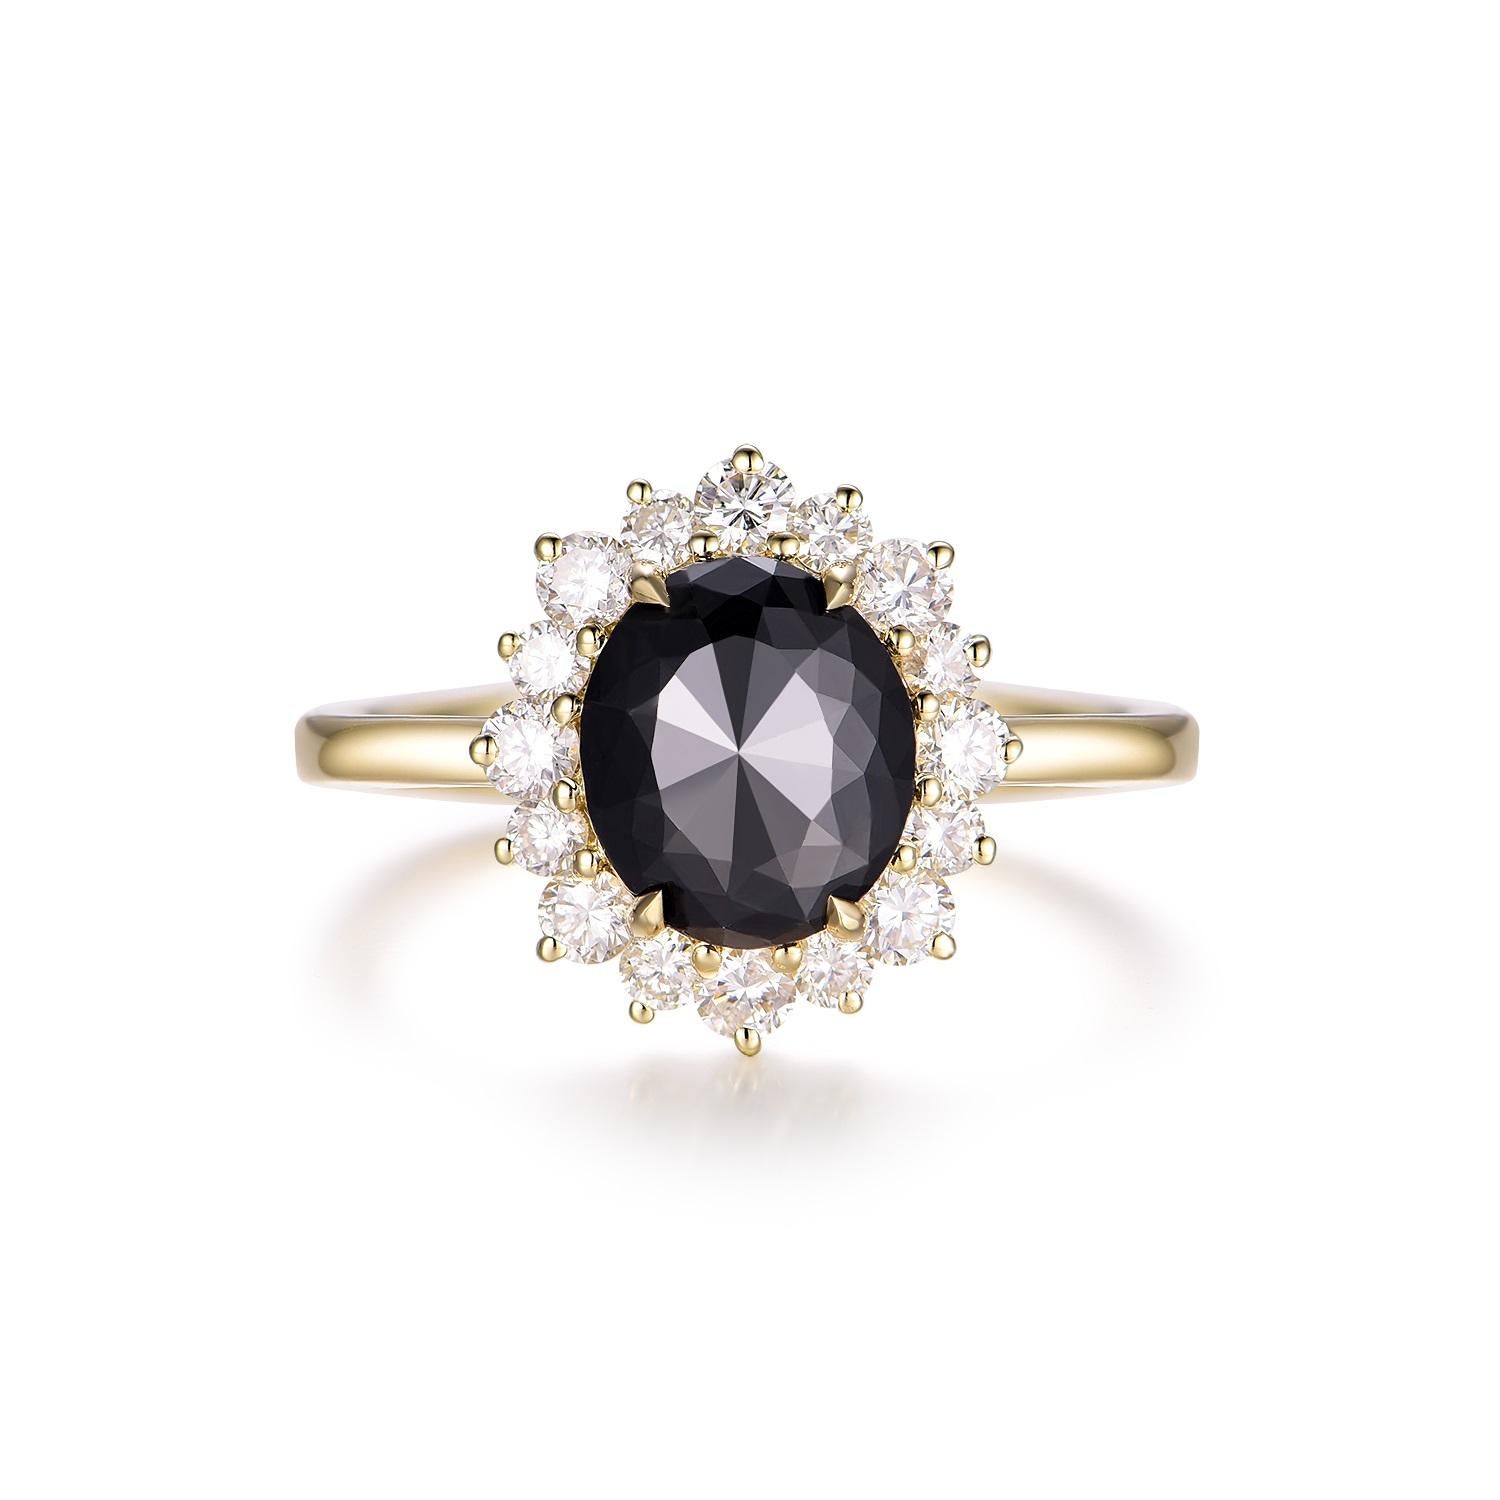 Indulge in the unparalleled beauty of this 14K yellow gold ring, boasting an IGI certified 2.27 carat black diamond. This majestic centerpiece captivates with its profound depth and intriguing allure, making it an instant symbol of